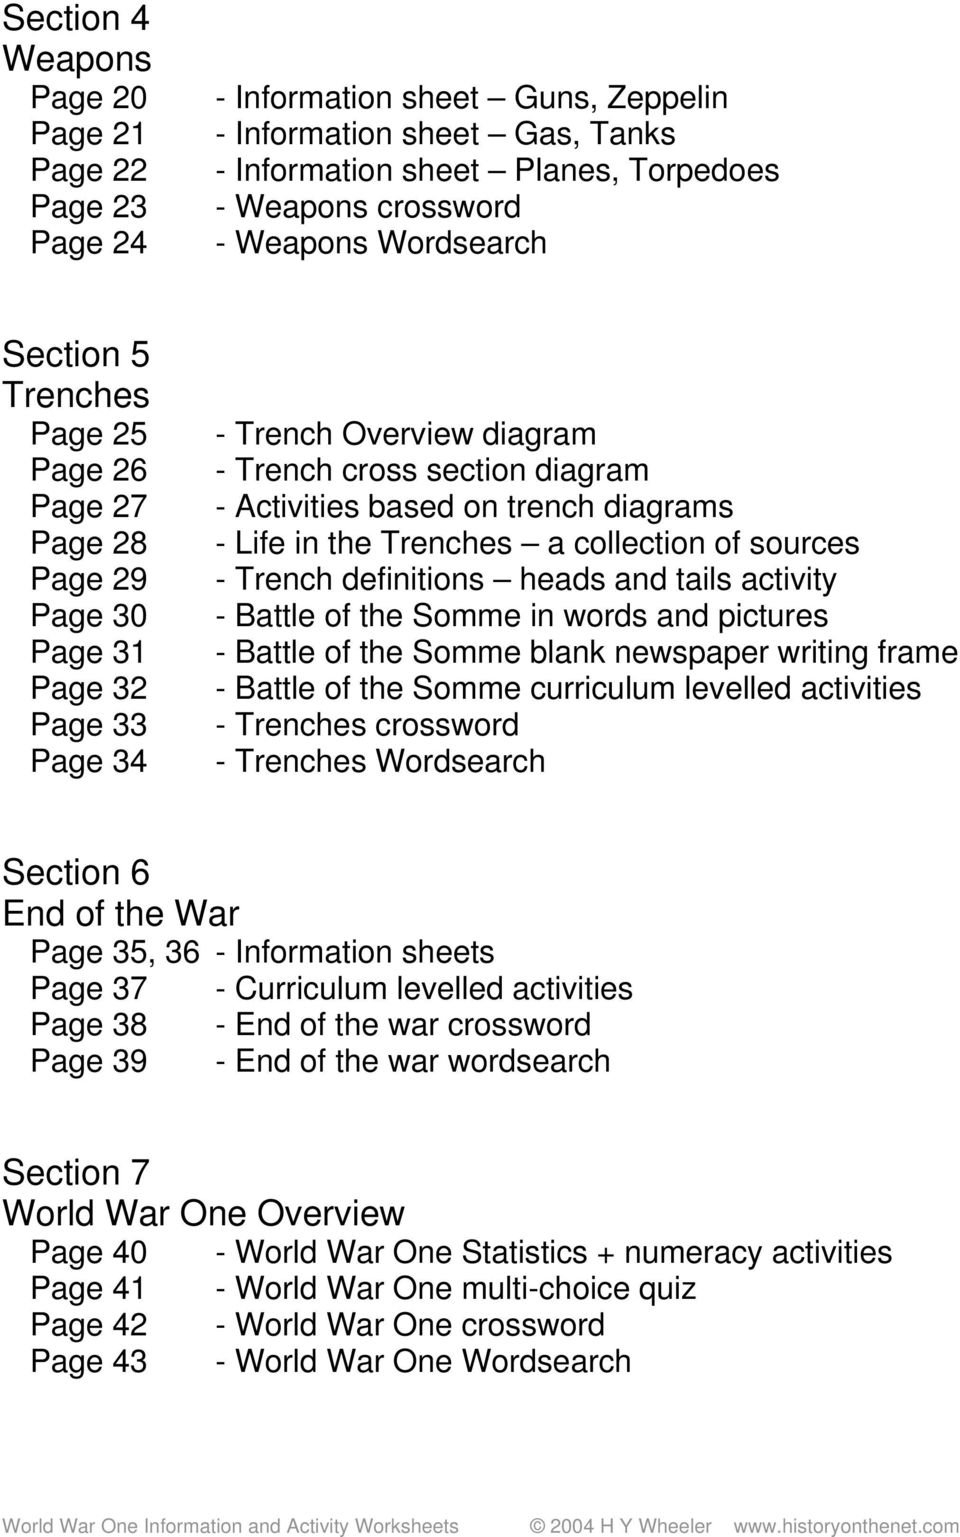 World War One Information And Activity Worksheets  Pdf Along With Life In The Trenches Worksheet